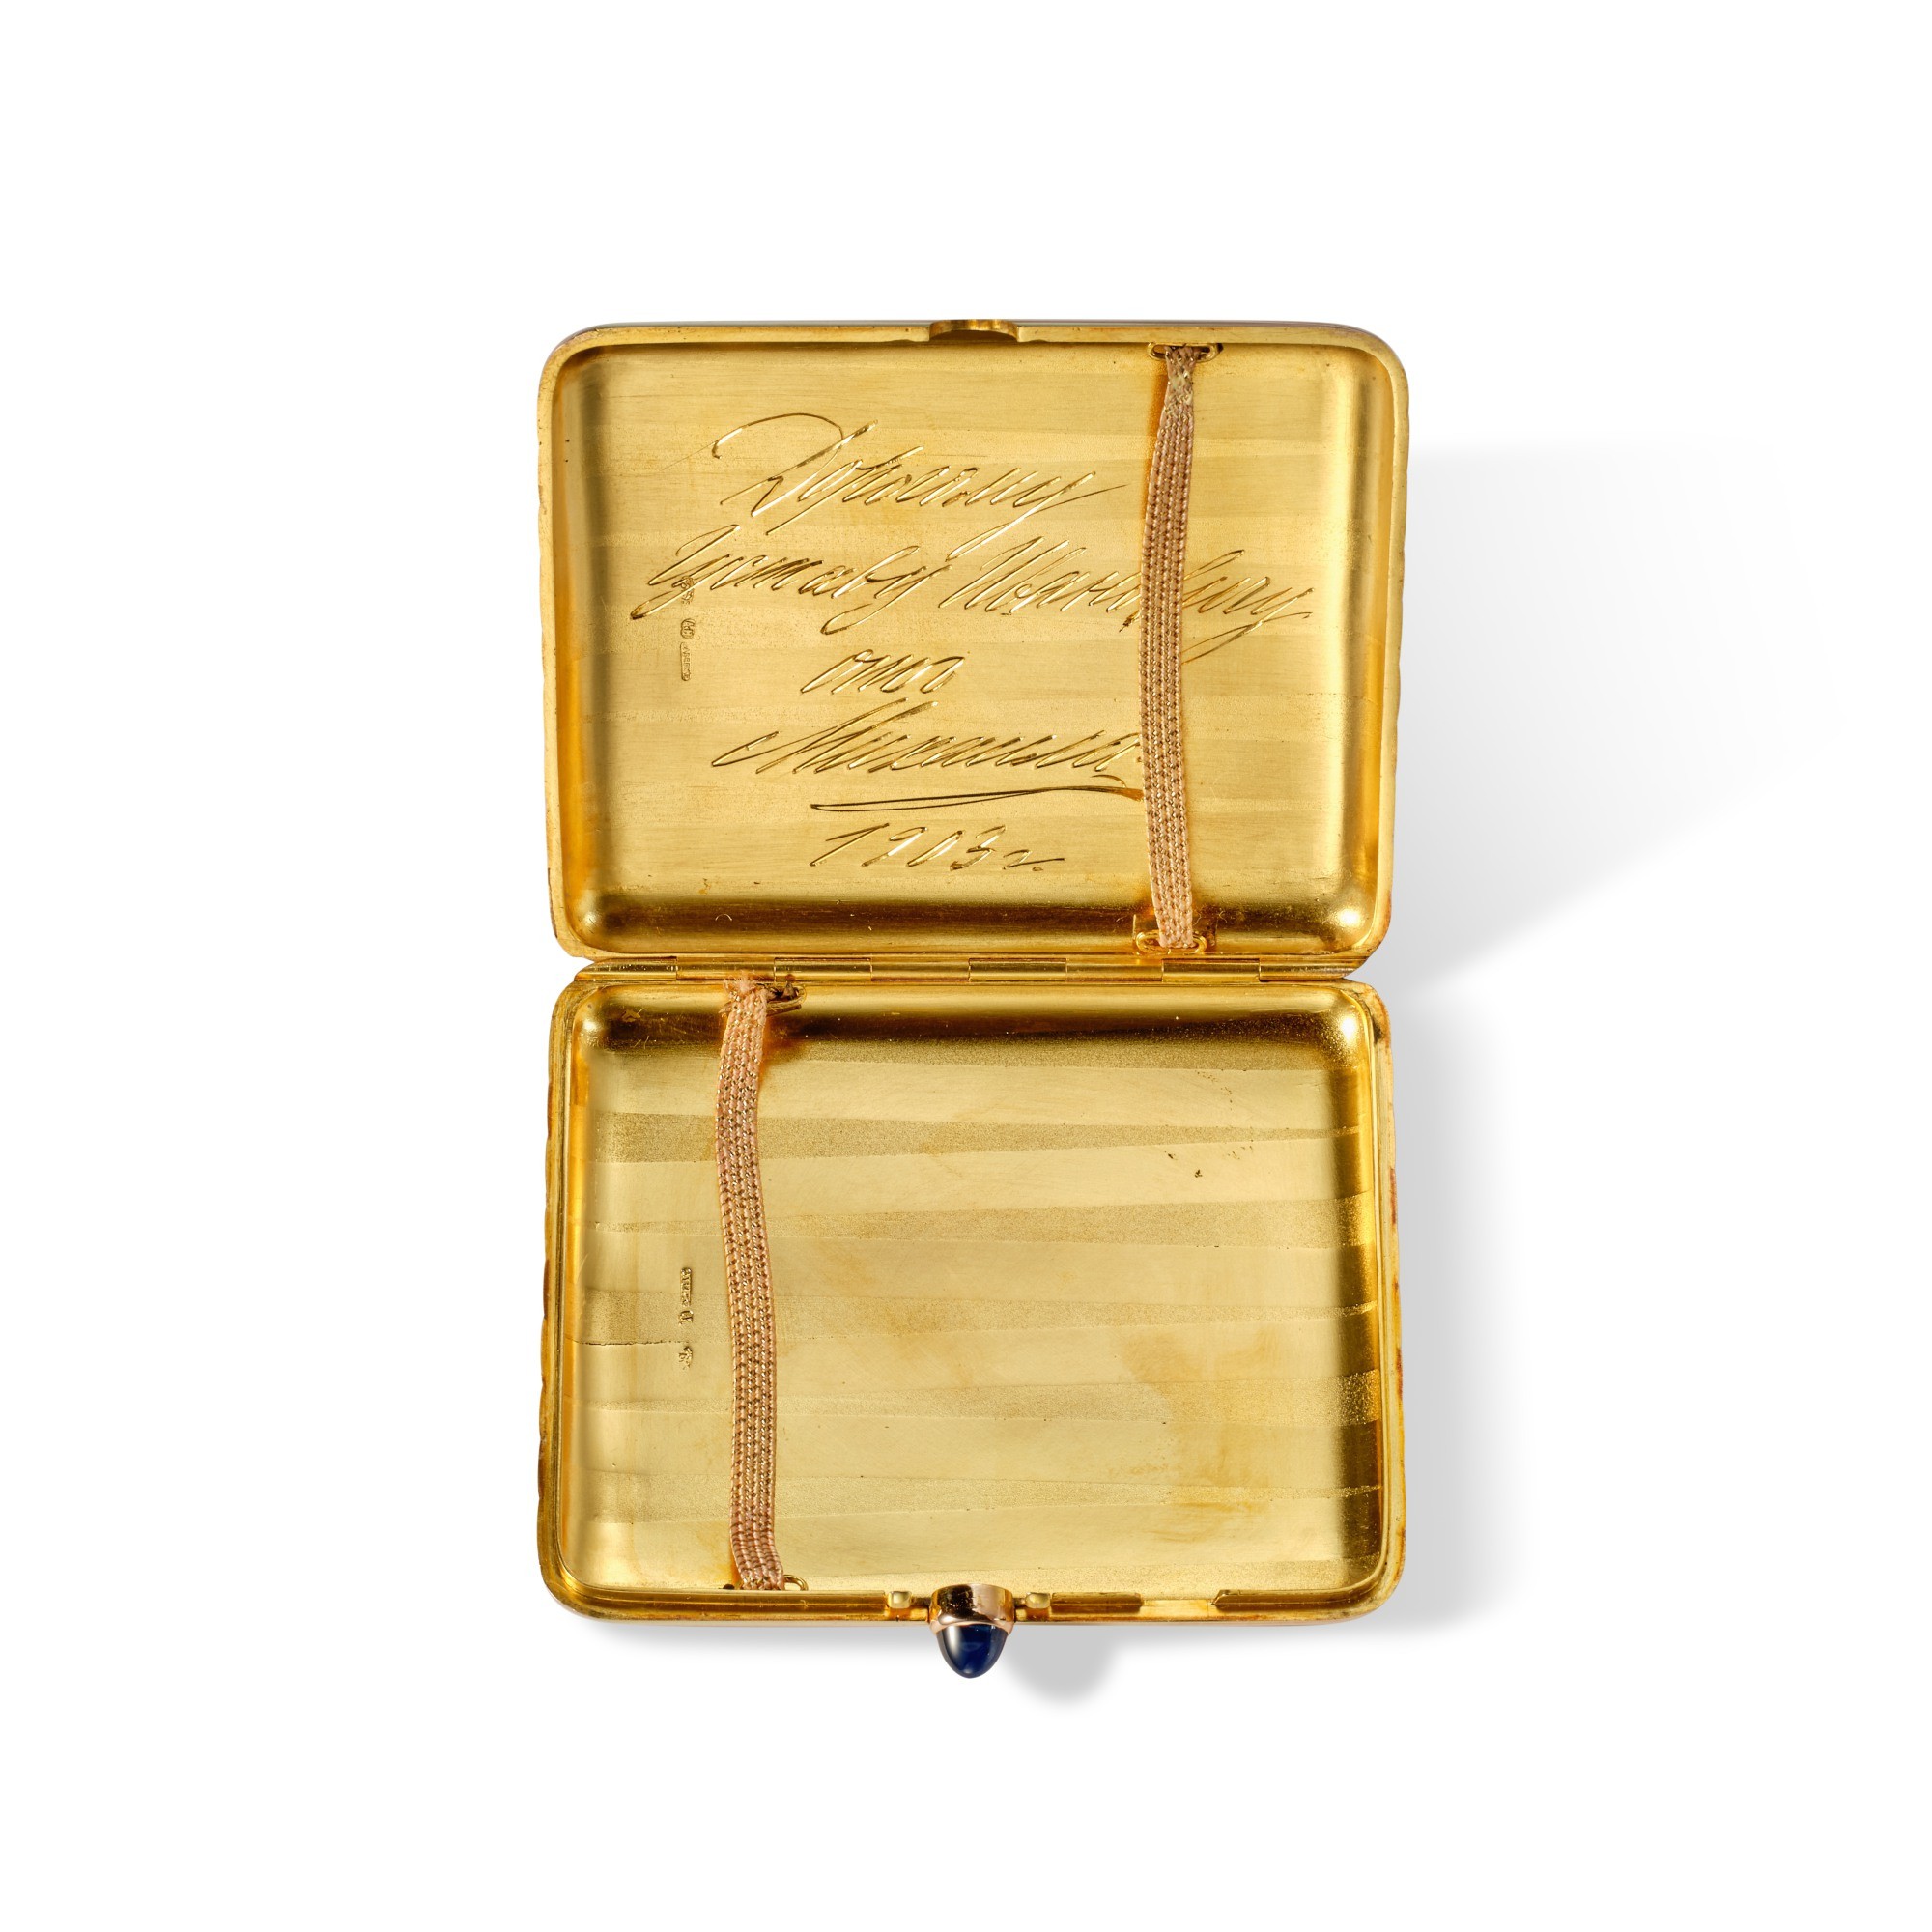 A jewelled Fabergé varicoloured gold cigarette case, August Hollming, circa 1903 - Image 4 of 4